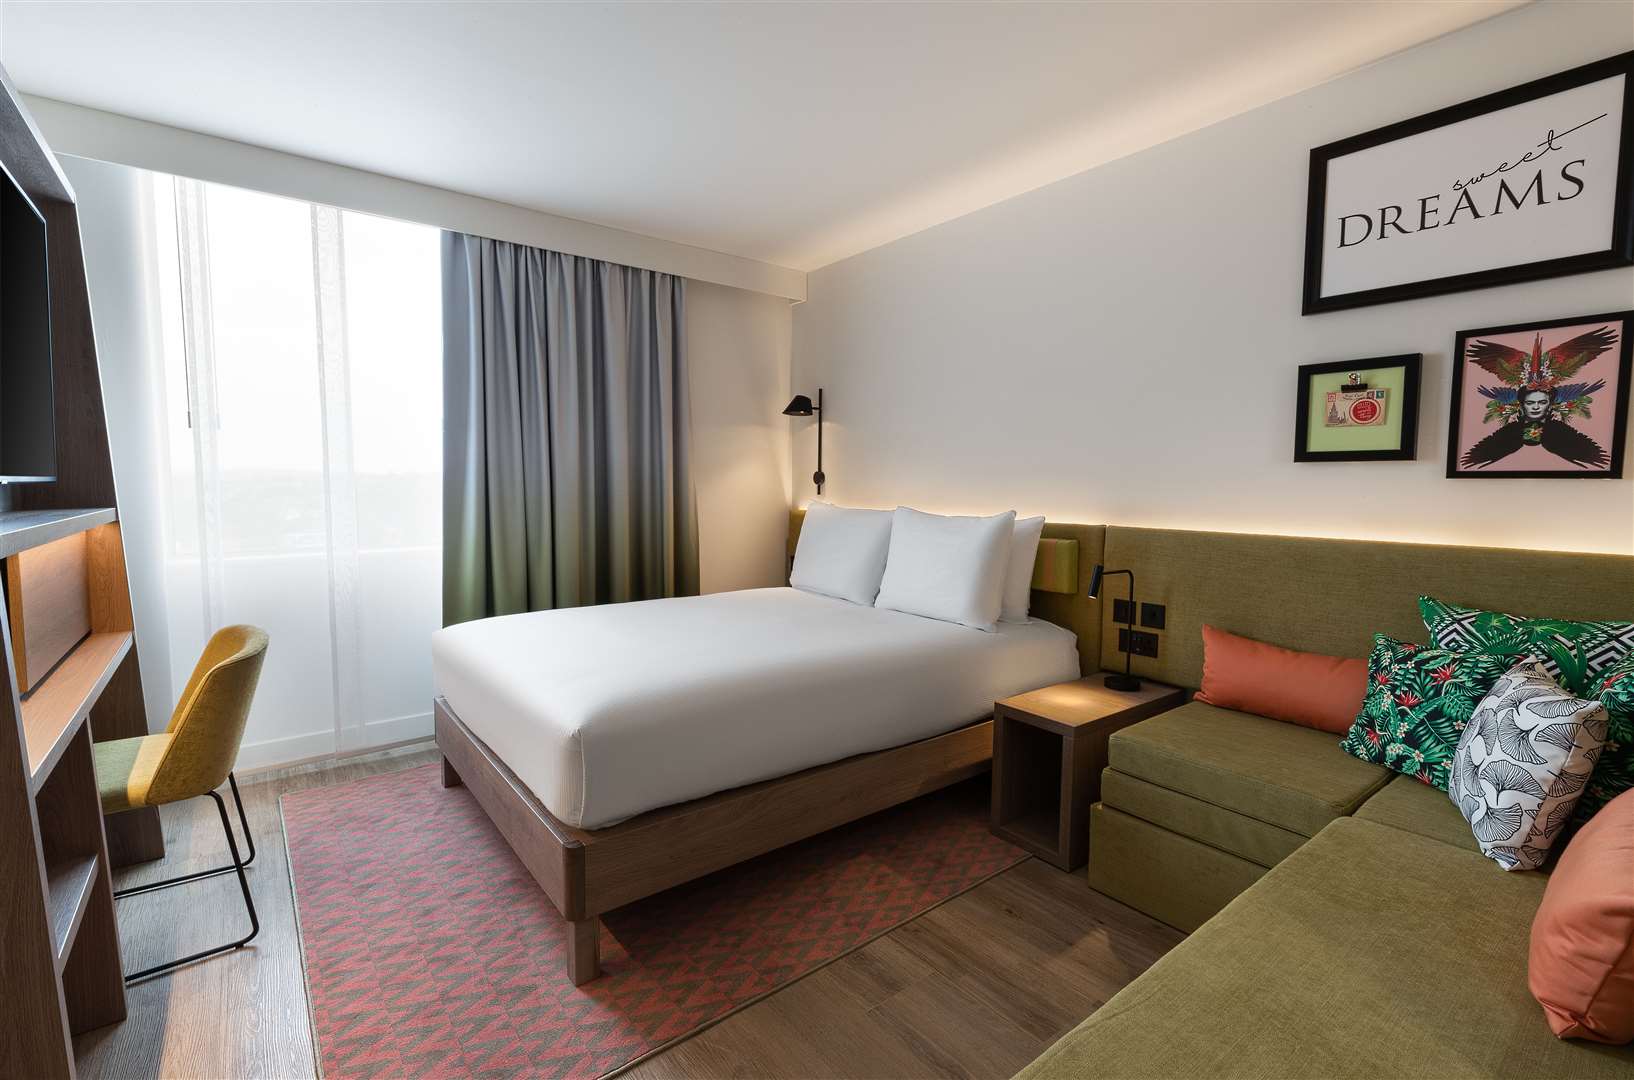 Bedrooms at the Hampton by Hilton will look like this when guests first visit on July 1